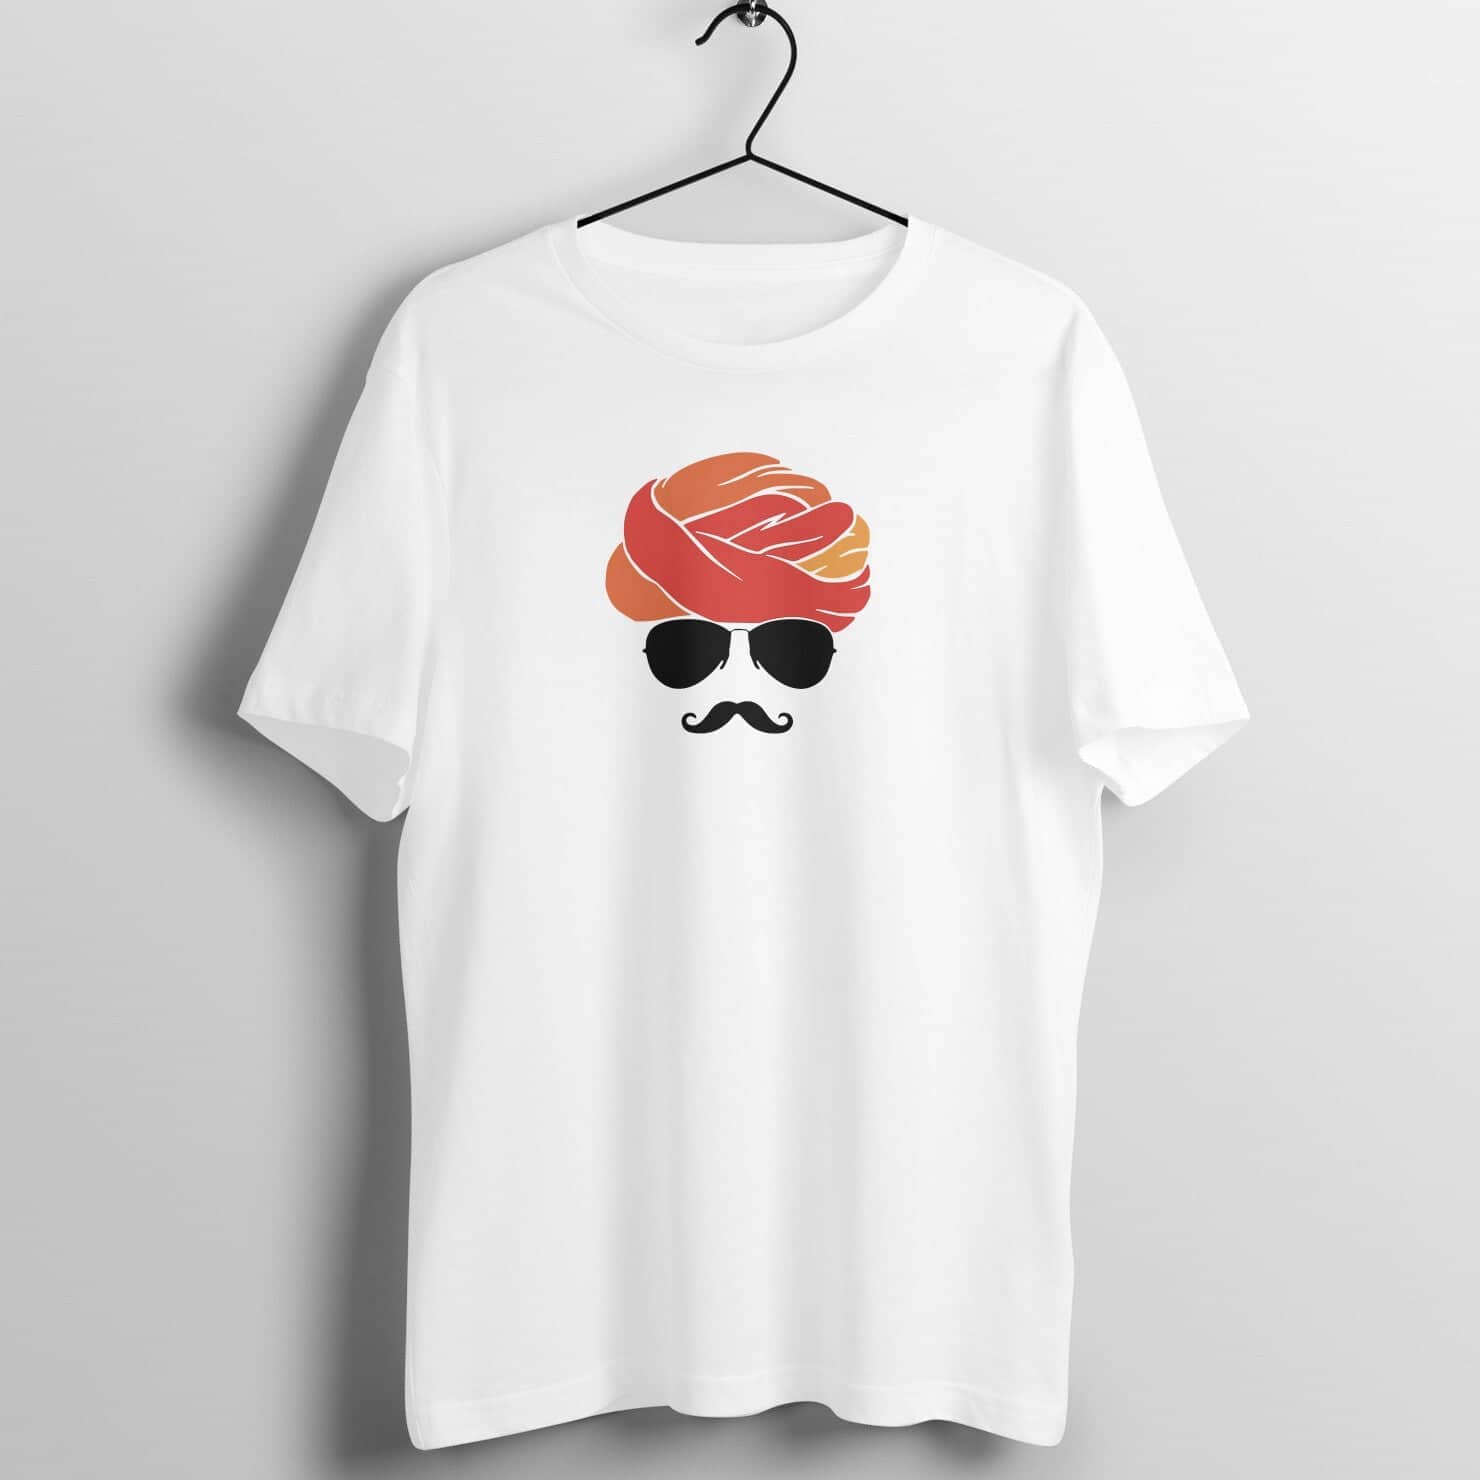 Traditional Rajasthani Man with Shades and Pagri Turban Exclusive White T Shirt for Men freeshipping - Catch My Drift India